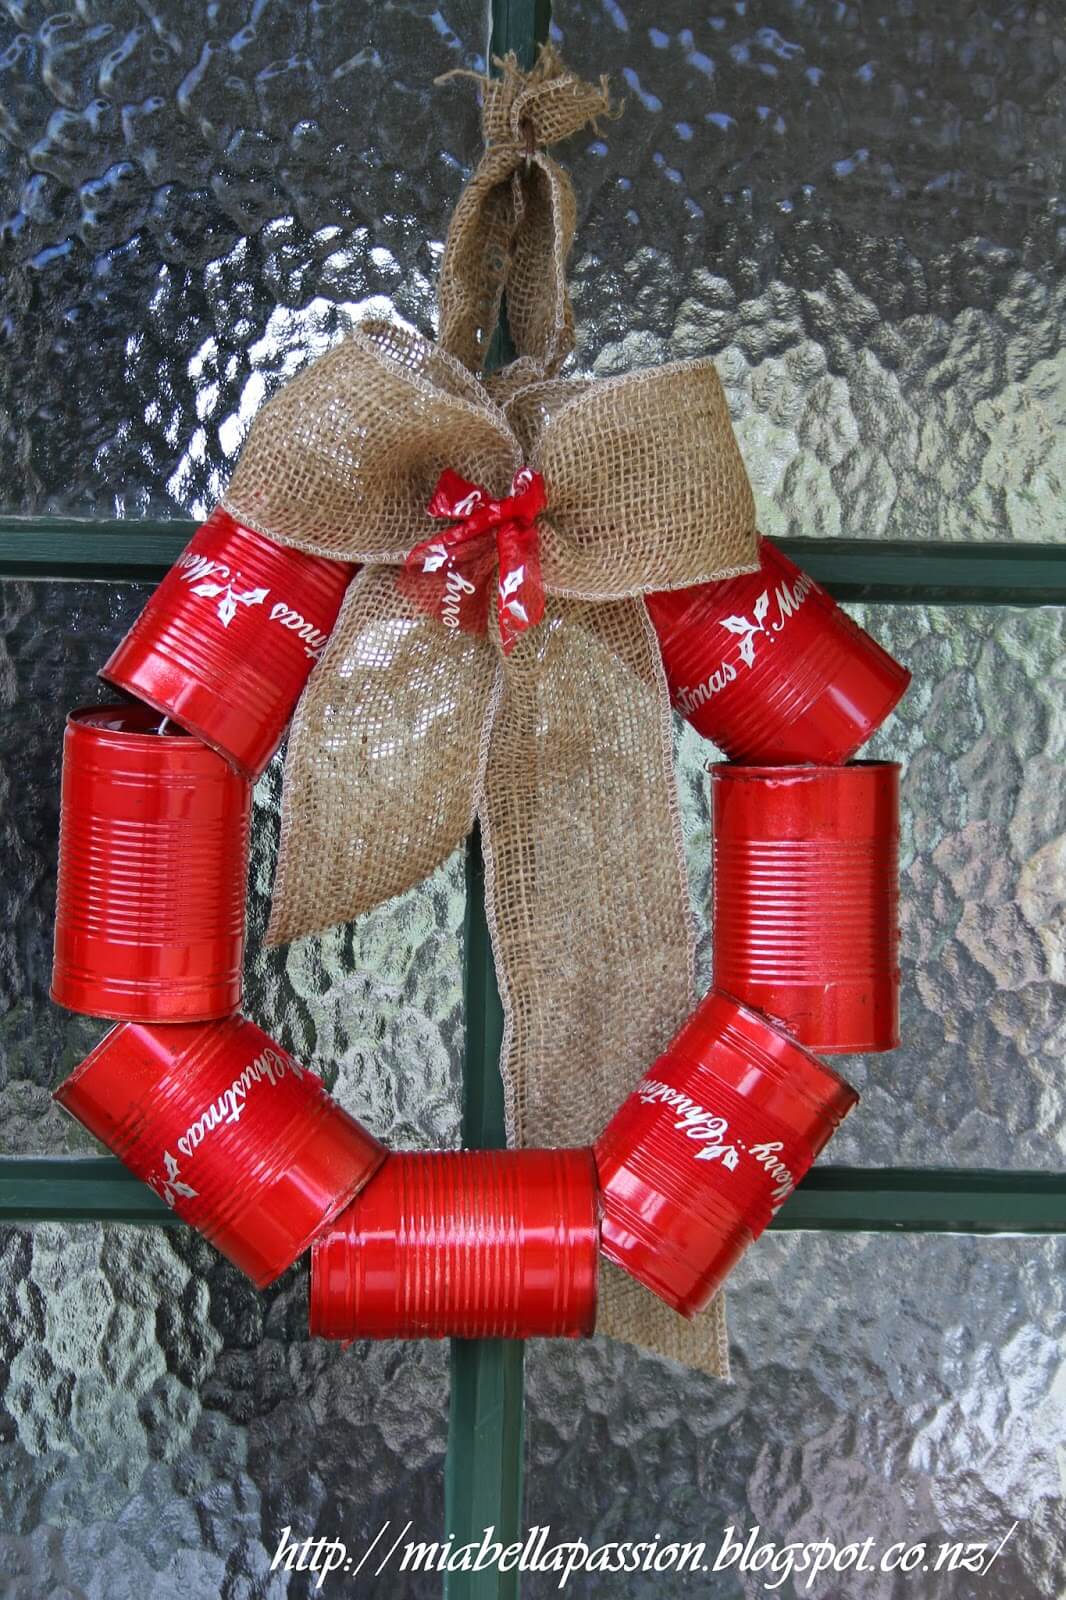 Awesome Tin can Wreath Crafts Idea for ChristmasTin can Crafts for Christmas